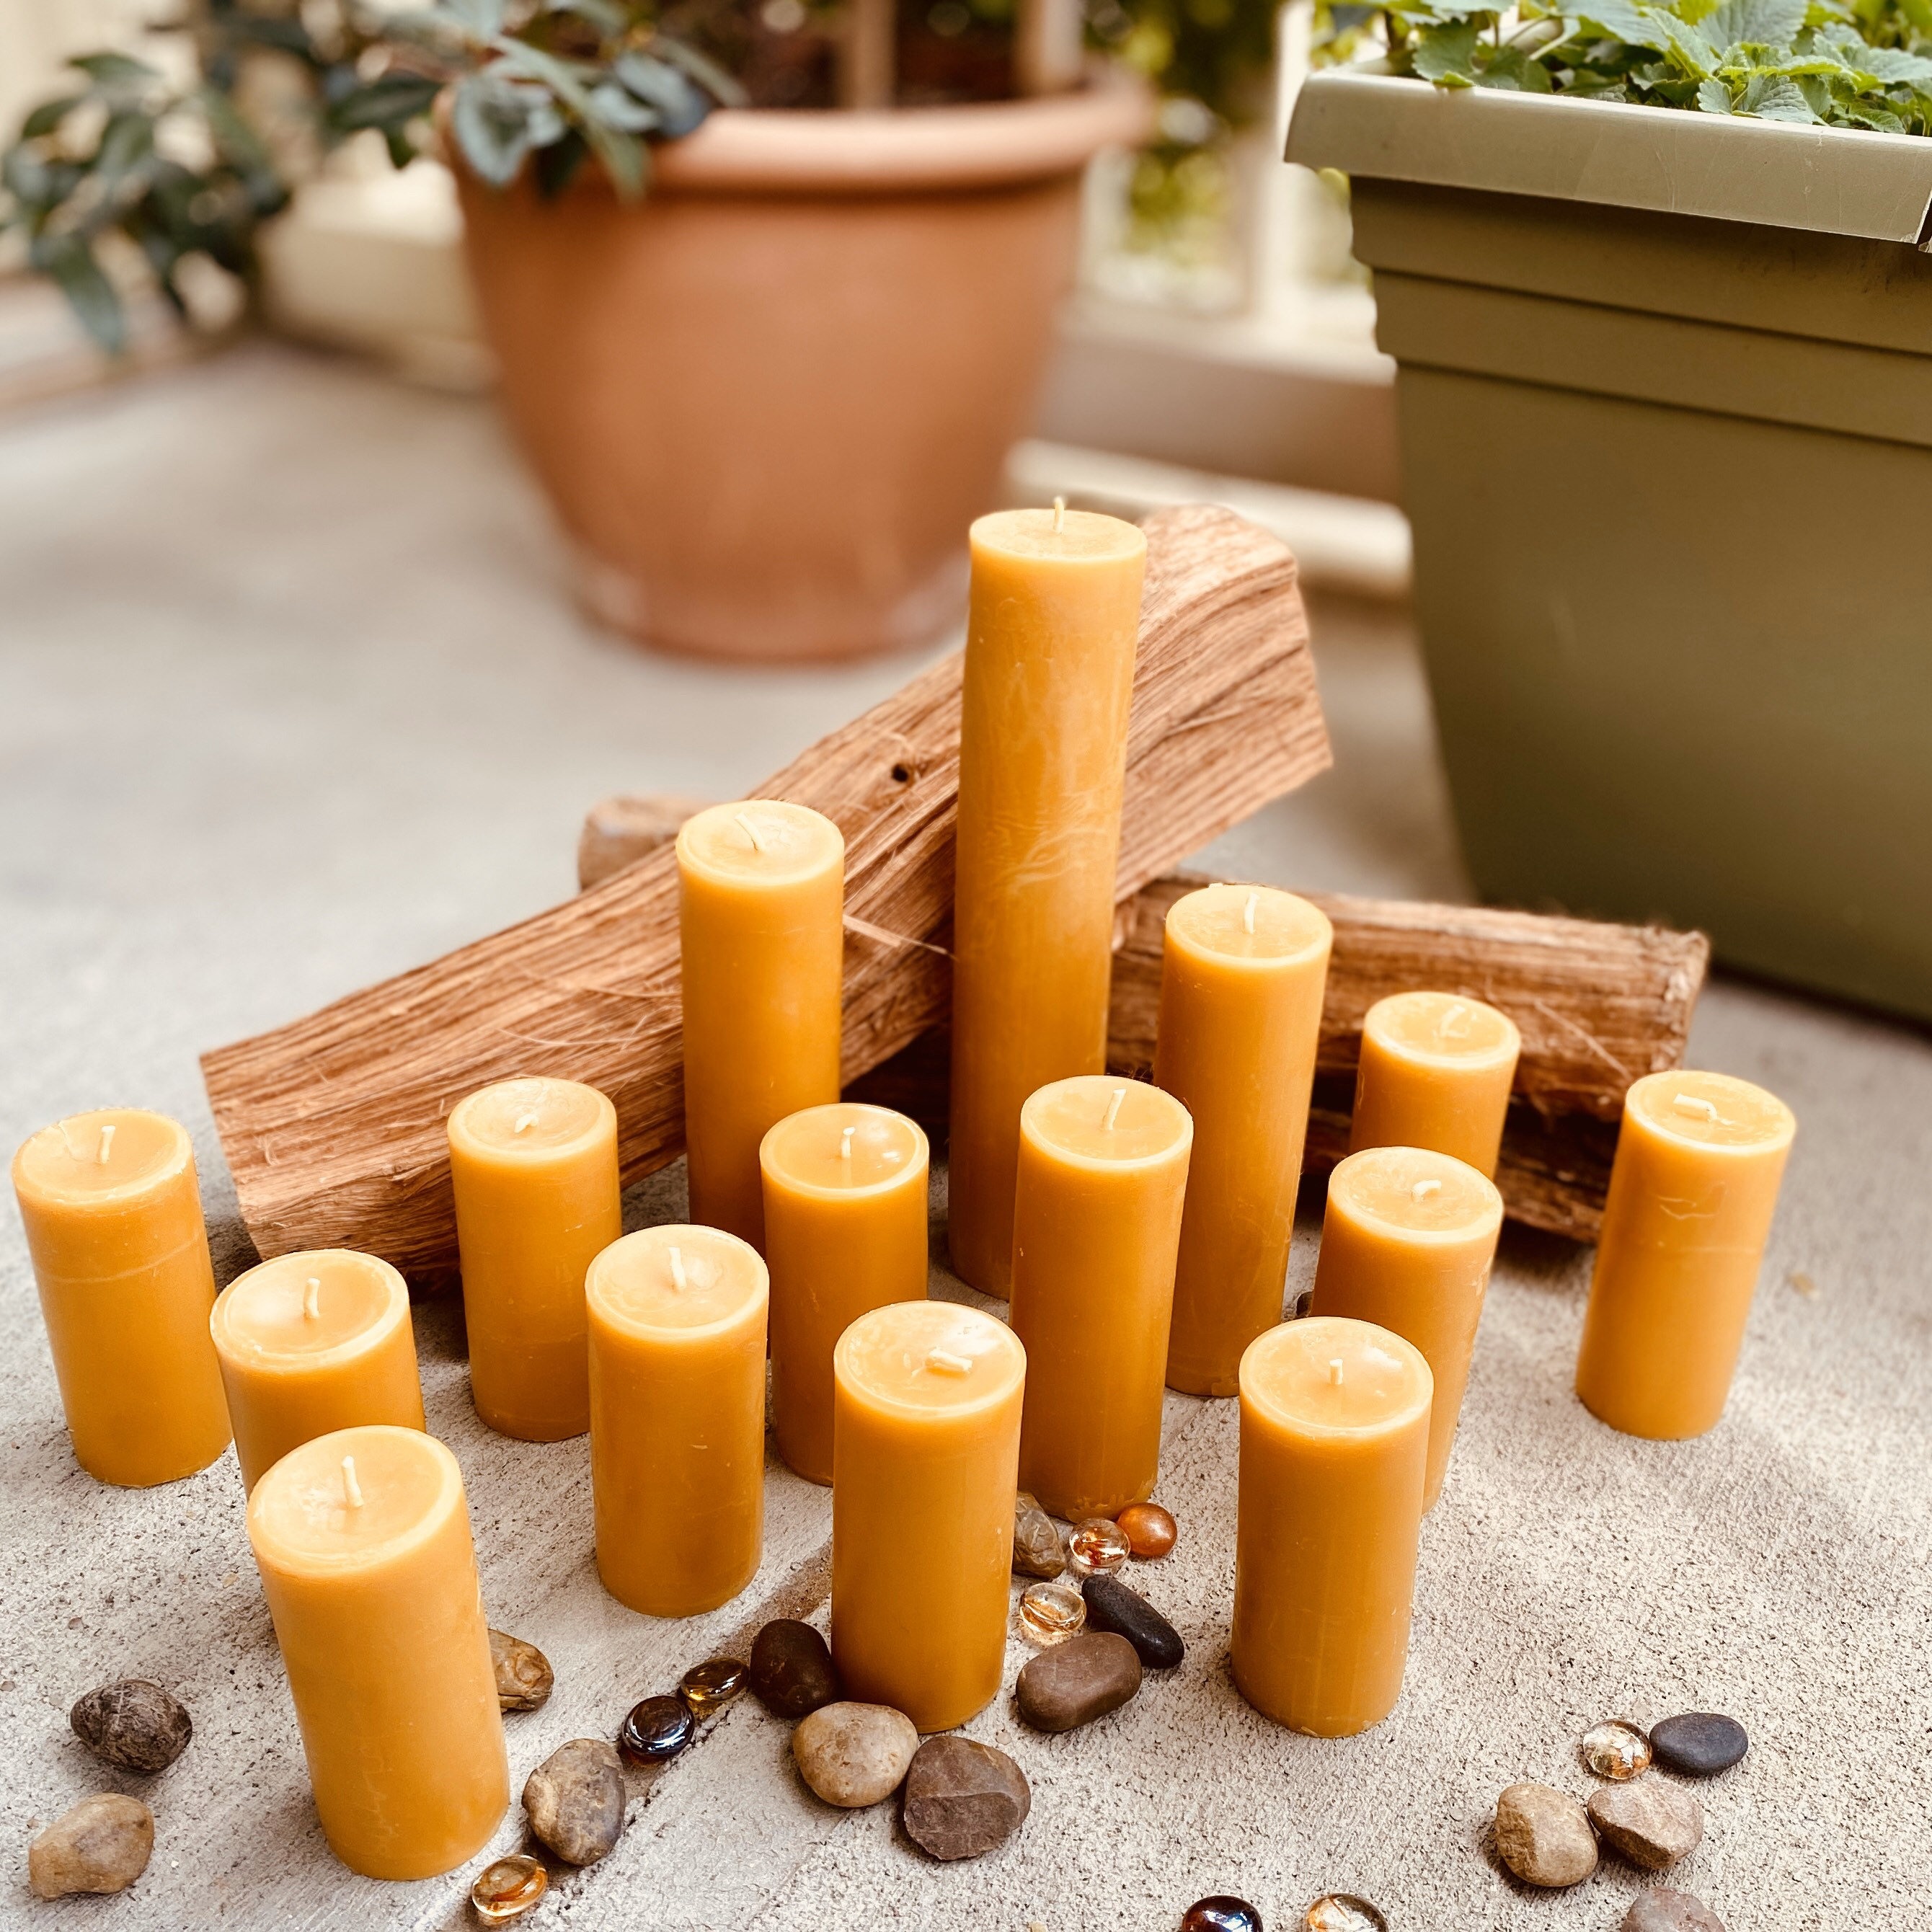 Beeswax Pillar Candle 1.25 Wide 2 Sizes 100% Pure Beeswax